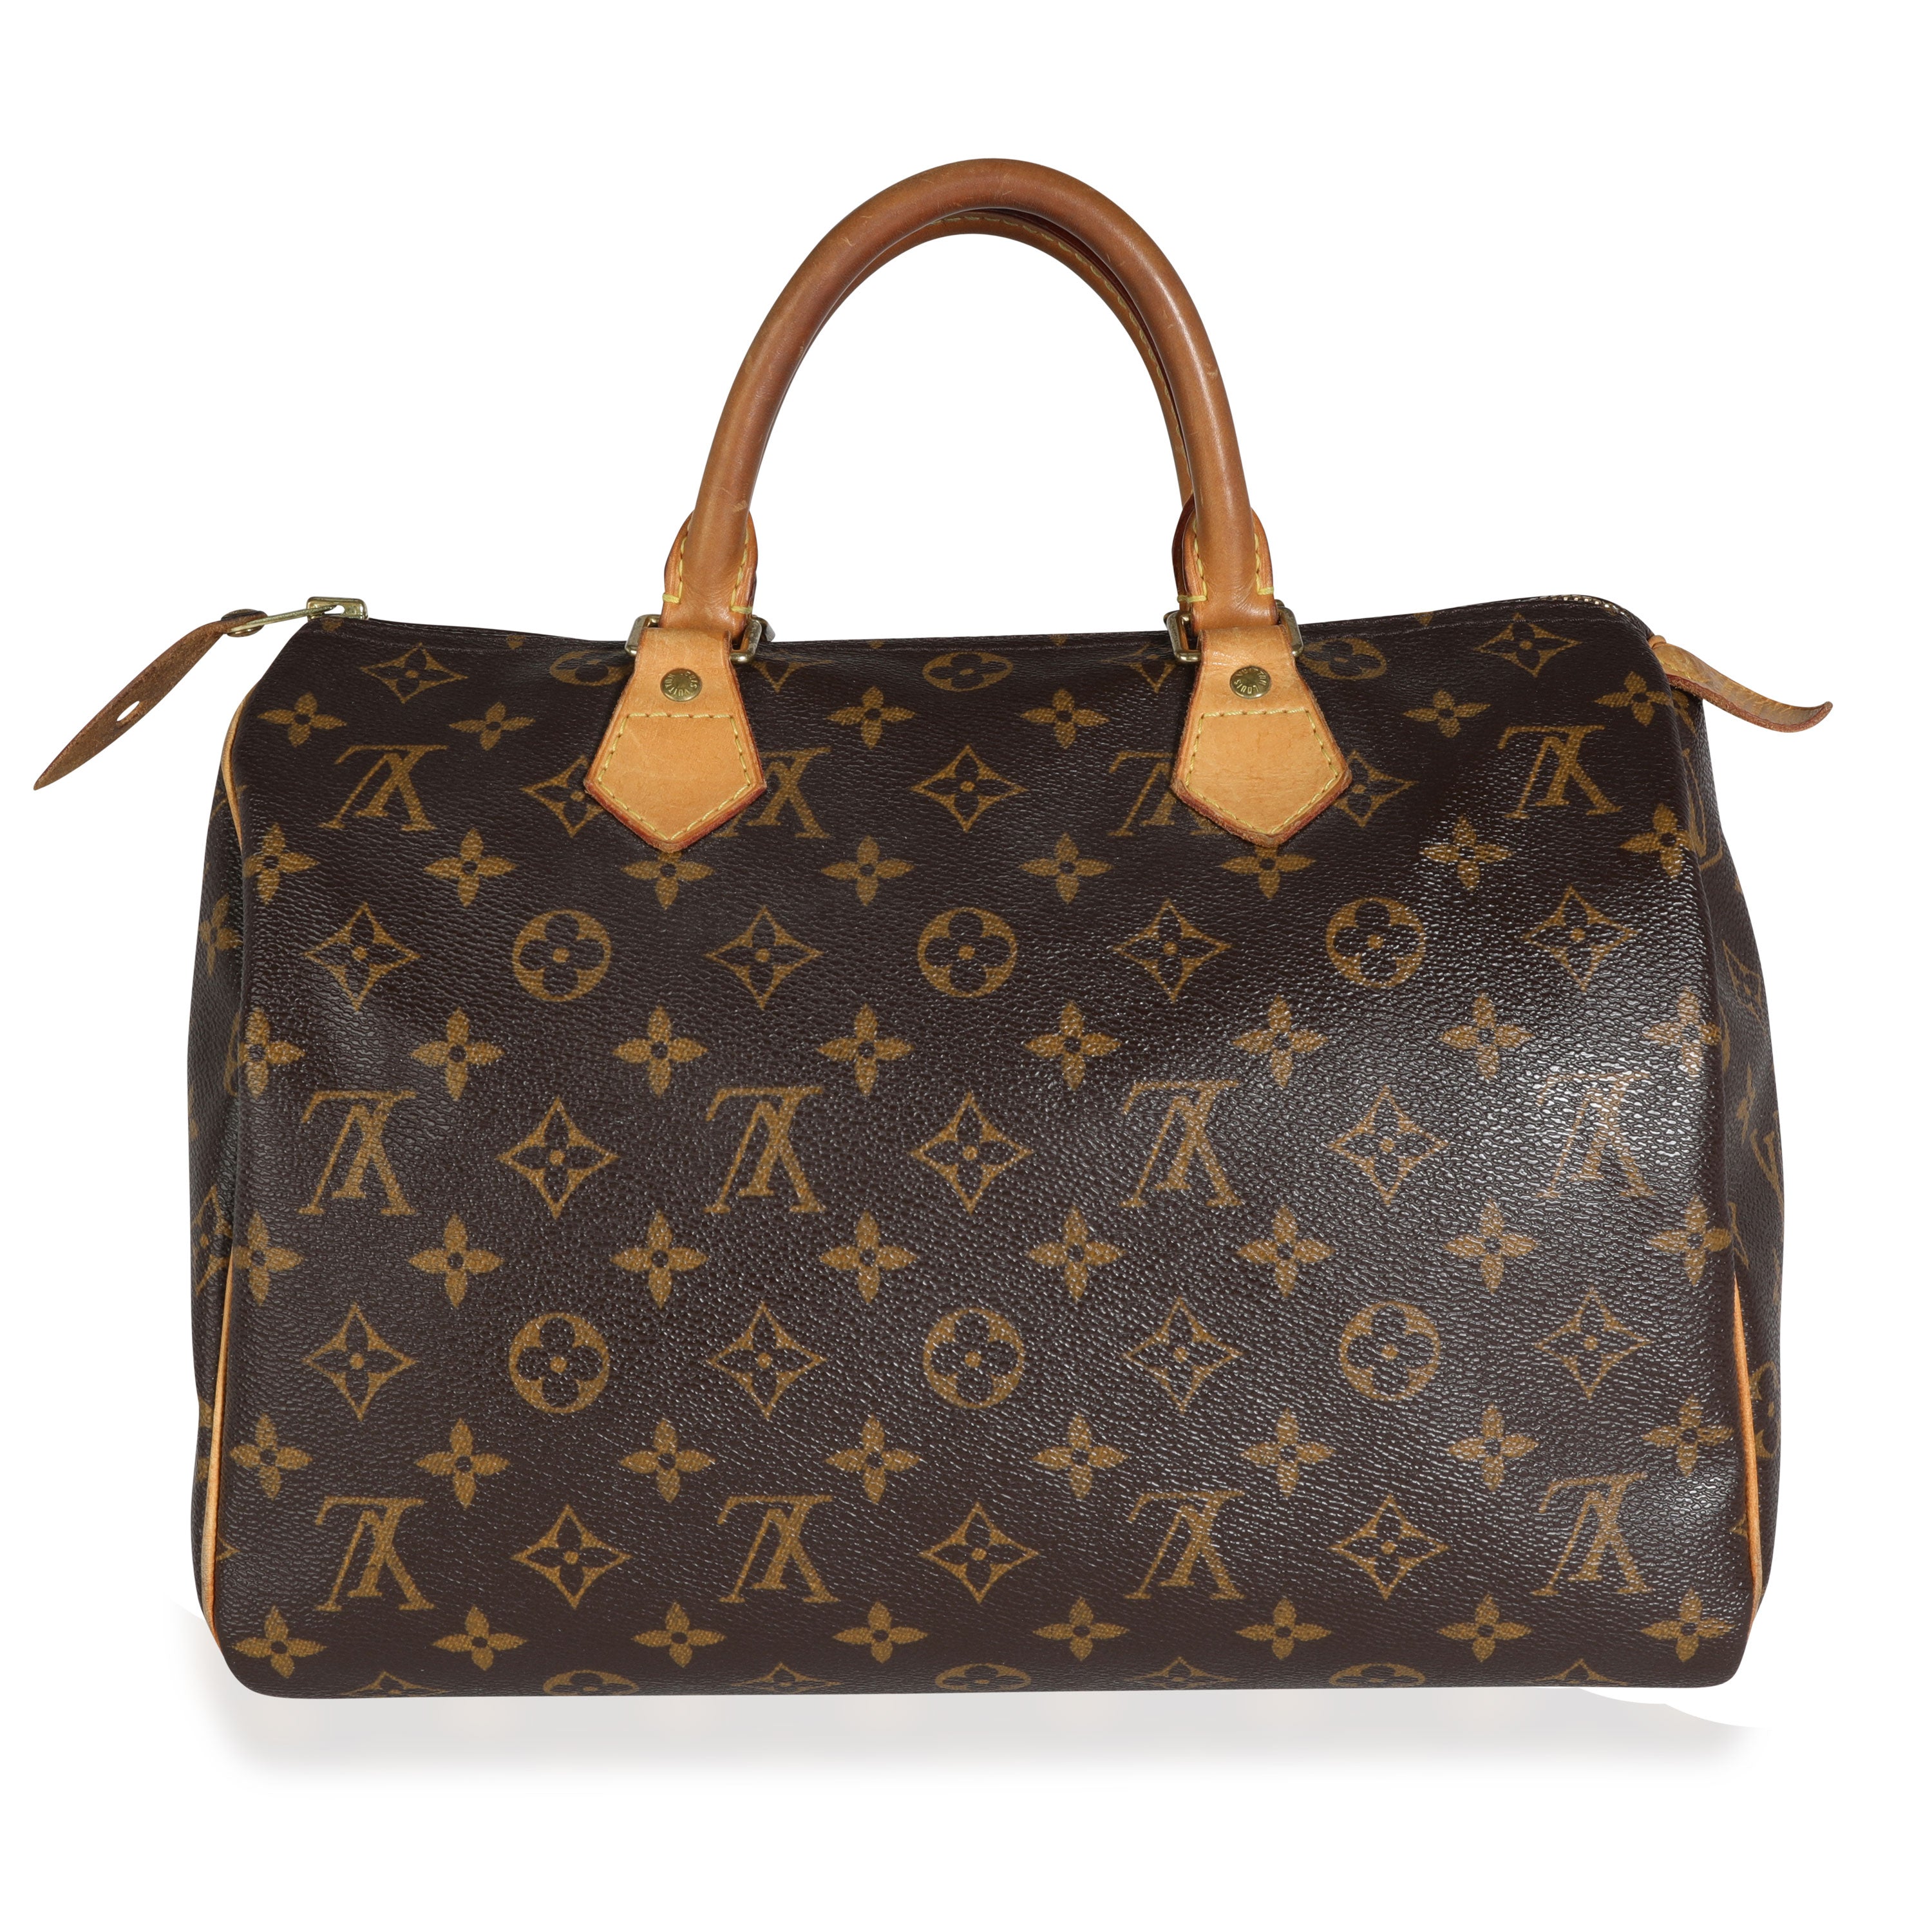 Louis Vuitton Shadow Monogram Discovery Backpack, myGemma, SG